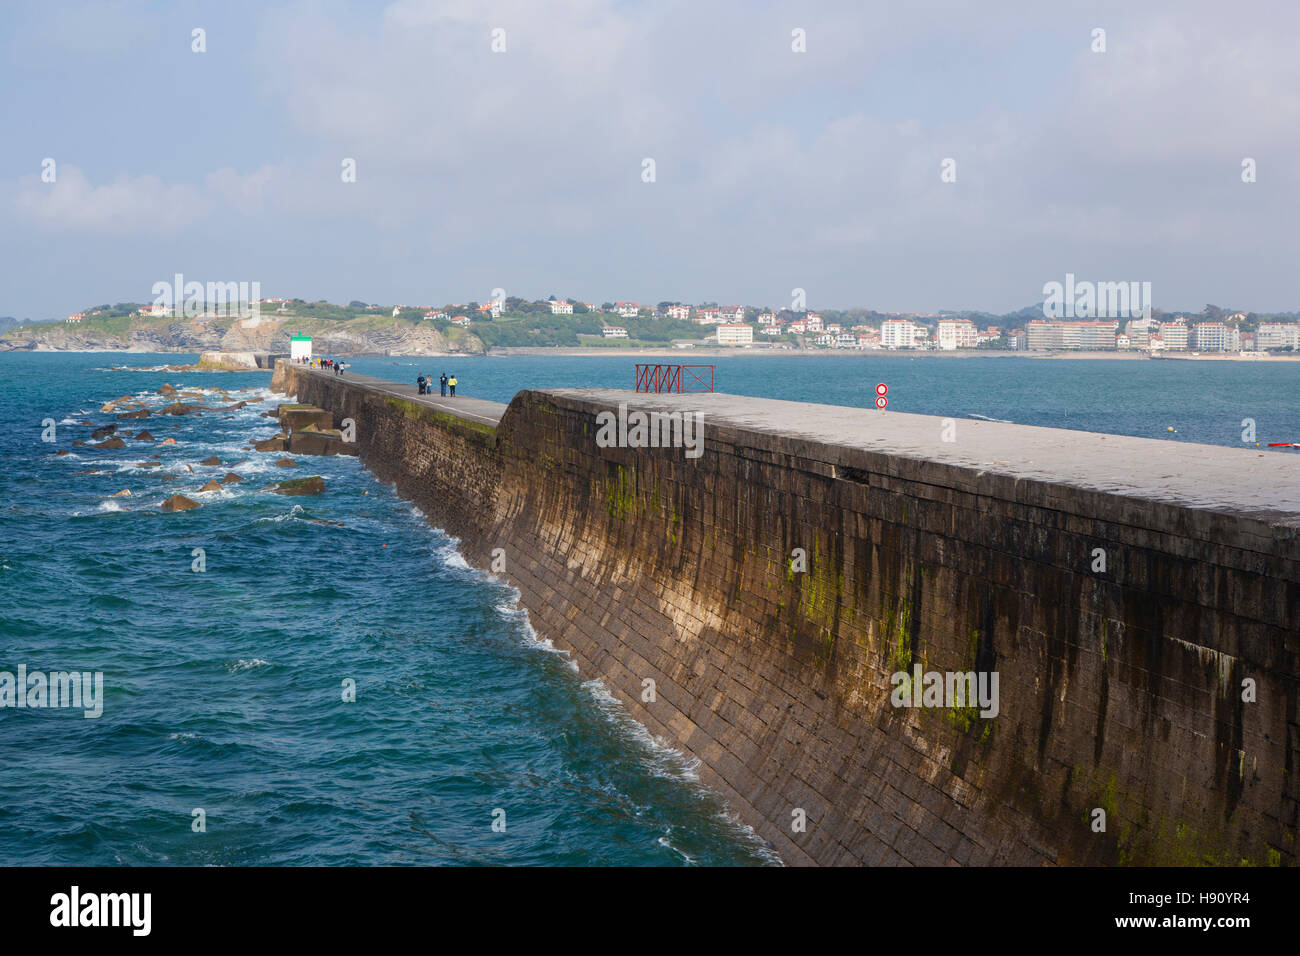 Sea wall or digue at the port of Saint-Jean-de-Luz, Basque Country, France Stock Photo